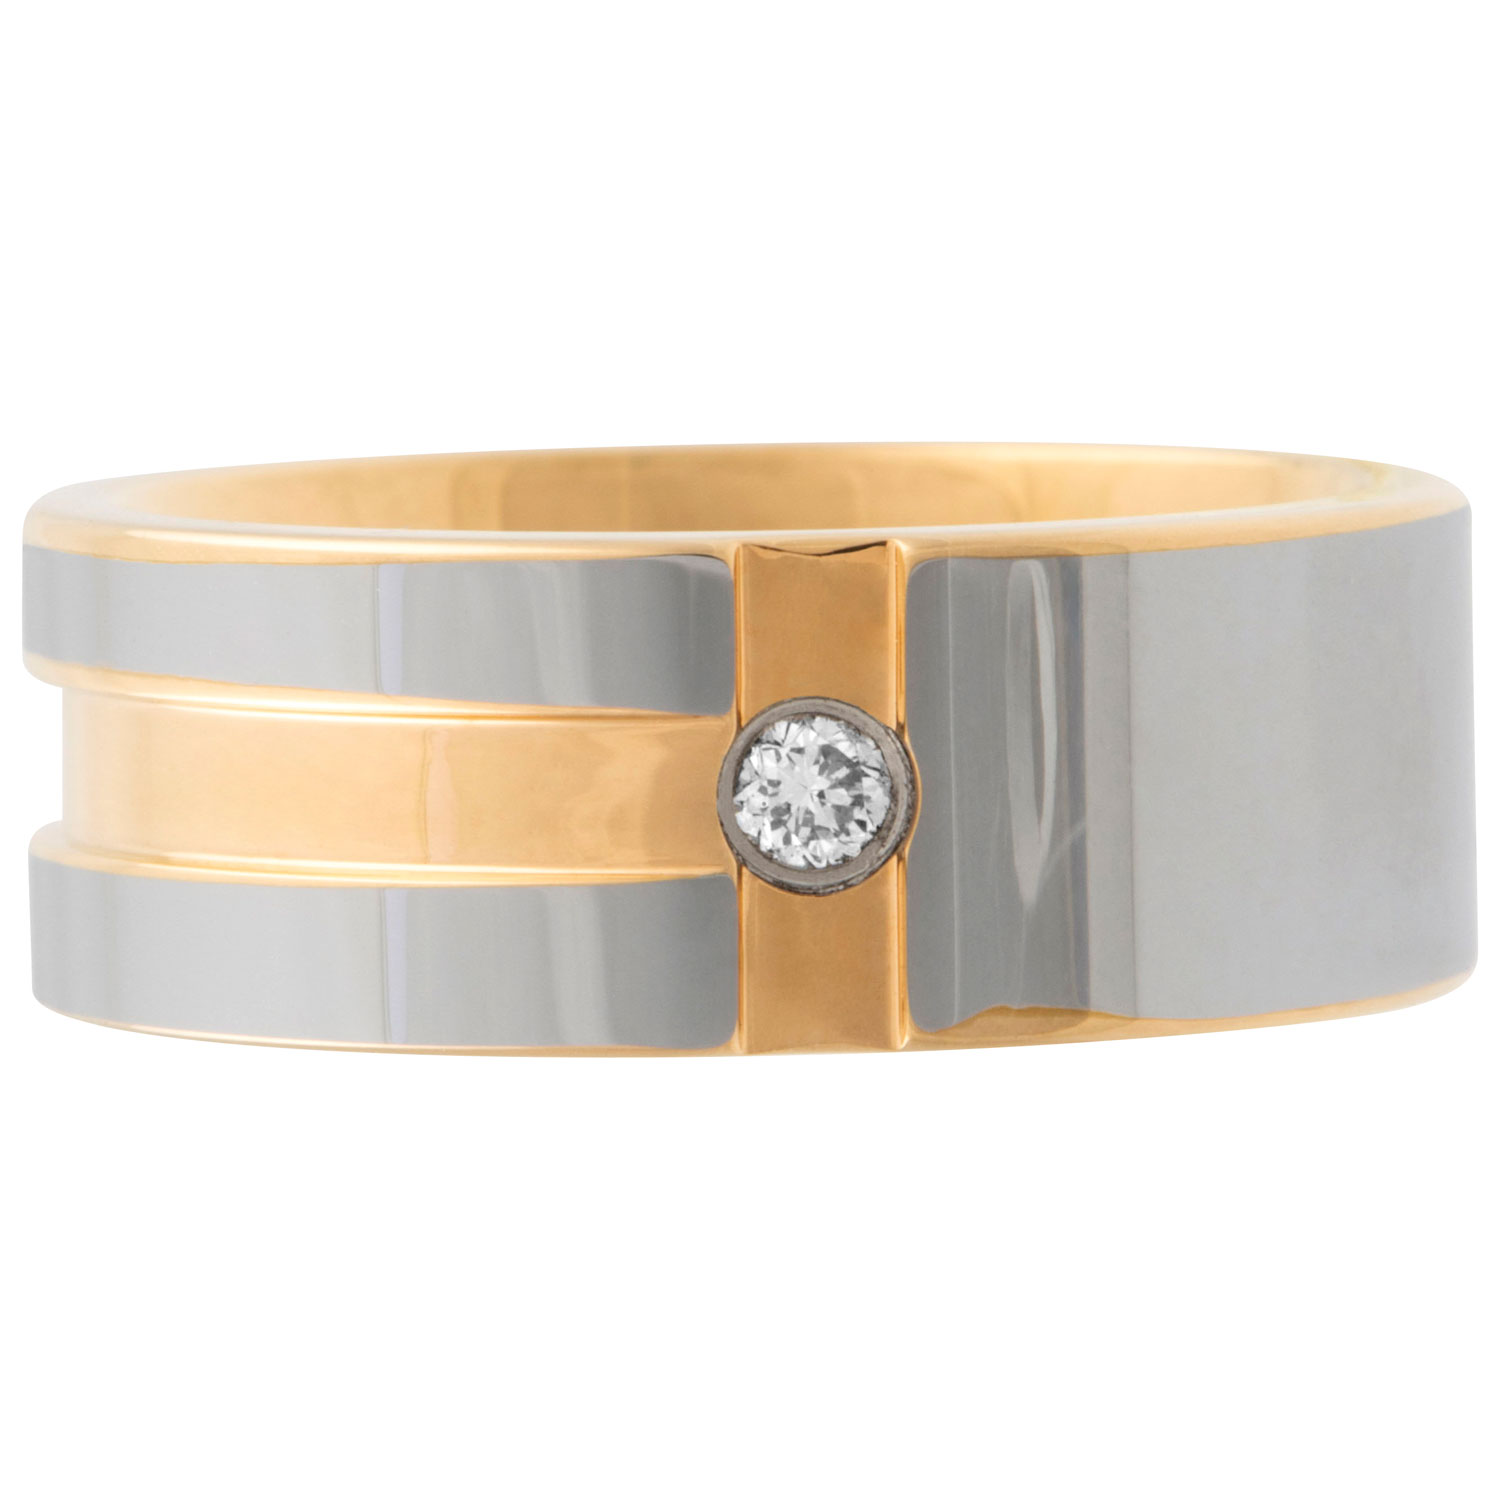 Le Reve Collection Gold T-Channel Flush Cubic Zirconia Ring in Silver/Gold Tungsten - Size 11